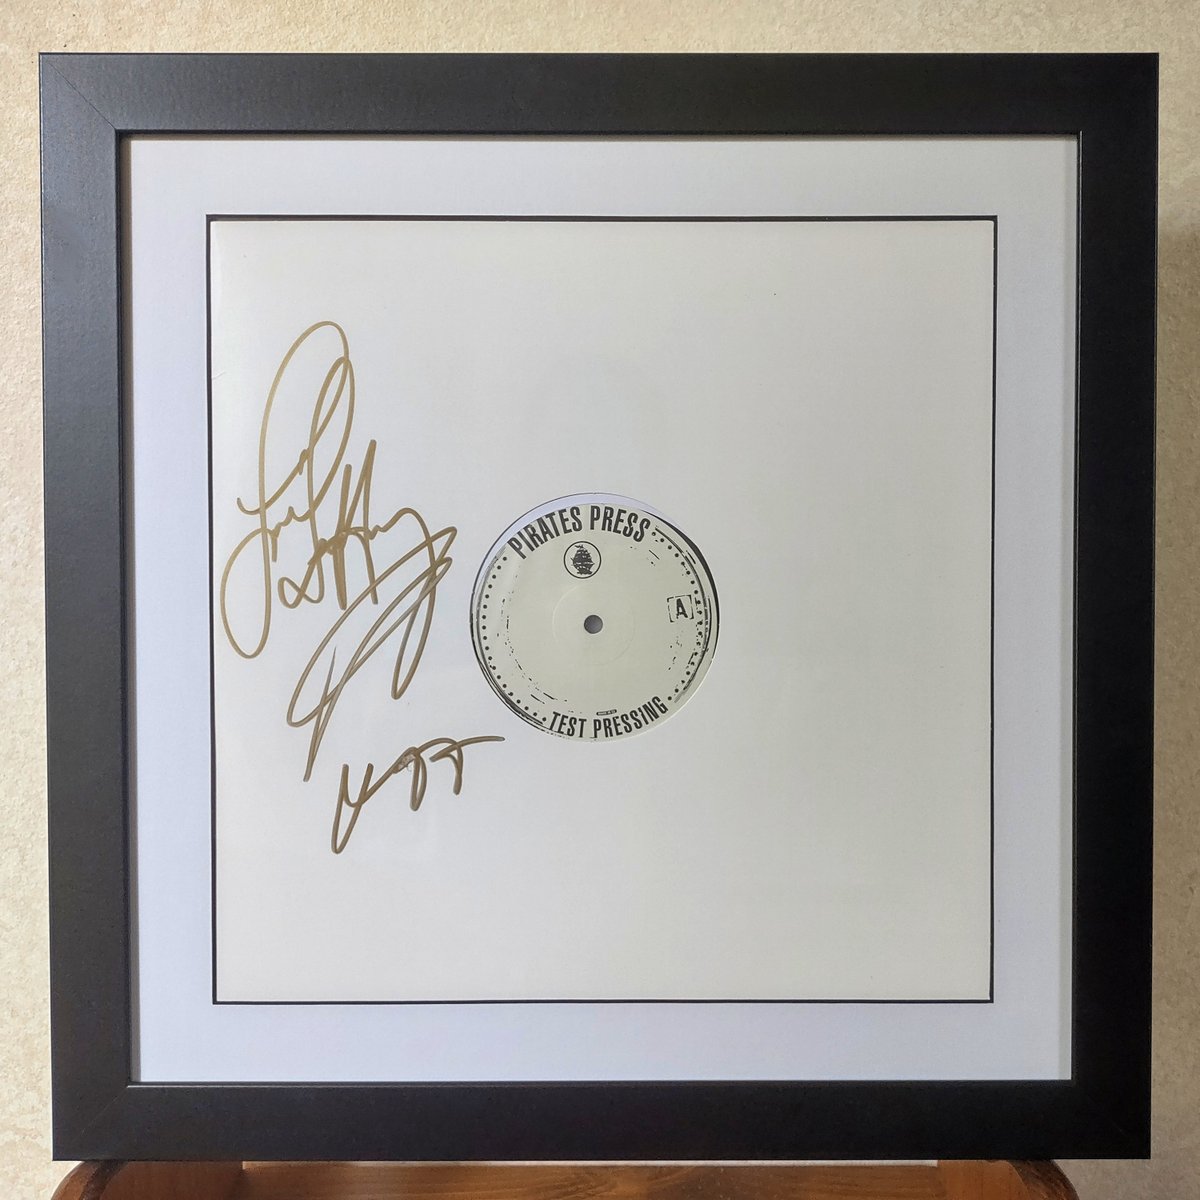 Deko Entertainment is excited to bring you exclusive framed signed test pressings from Tiffany and her latest release “Shadows”. 

dekoentertainment.com/test-pressing

#DekoEntertainment #ExclusiveOffer #LimitedEdition #SignedTestPressing #FramedCollectible #OneOfAKind #TiffanyShadows